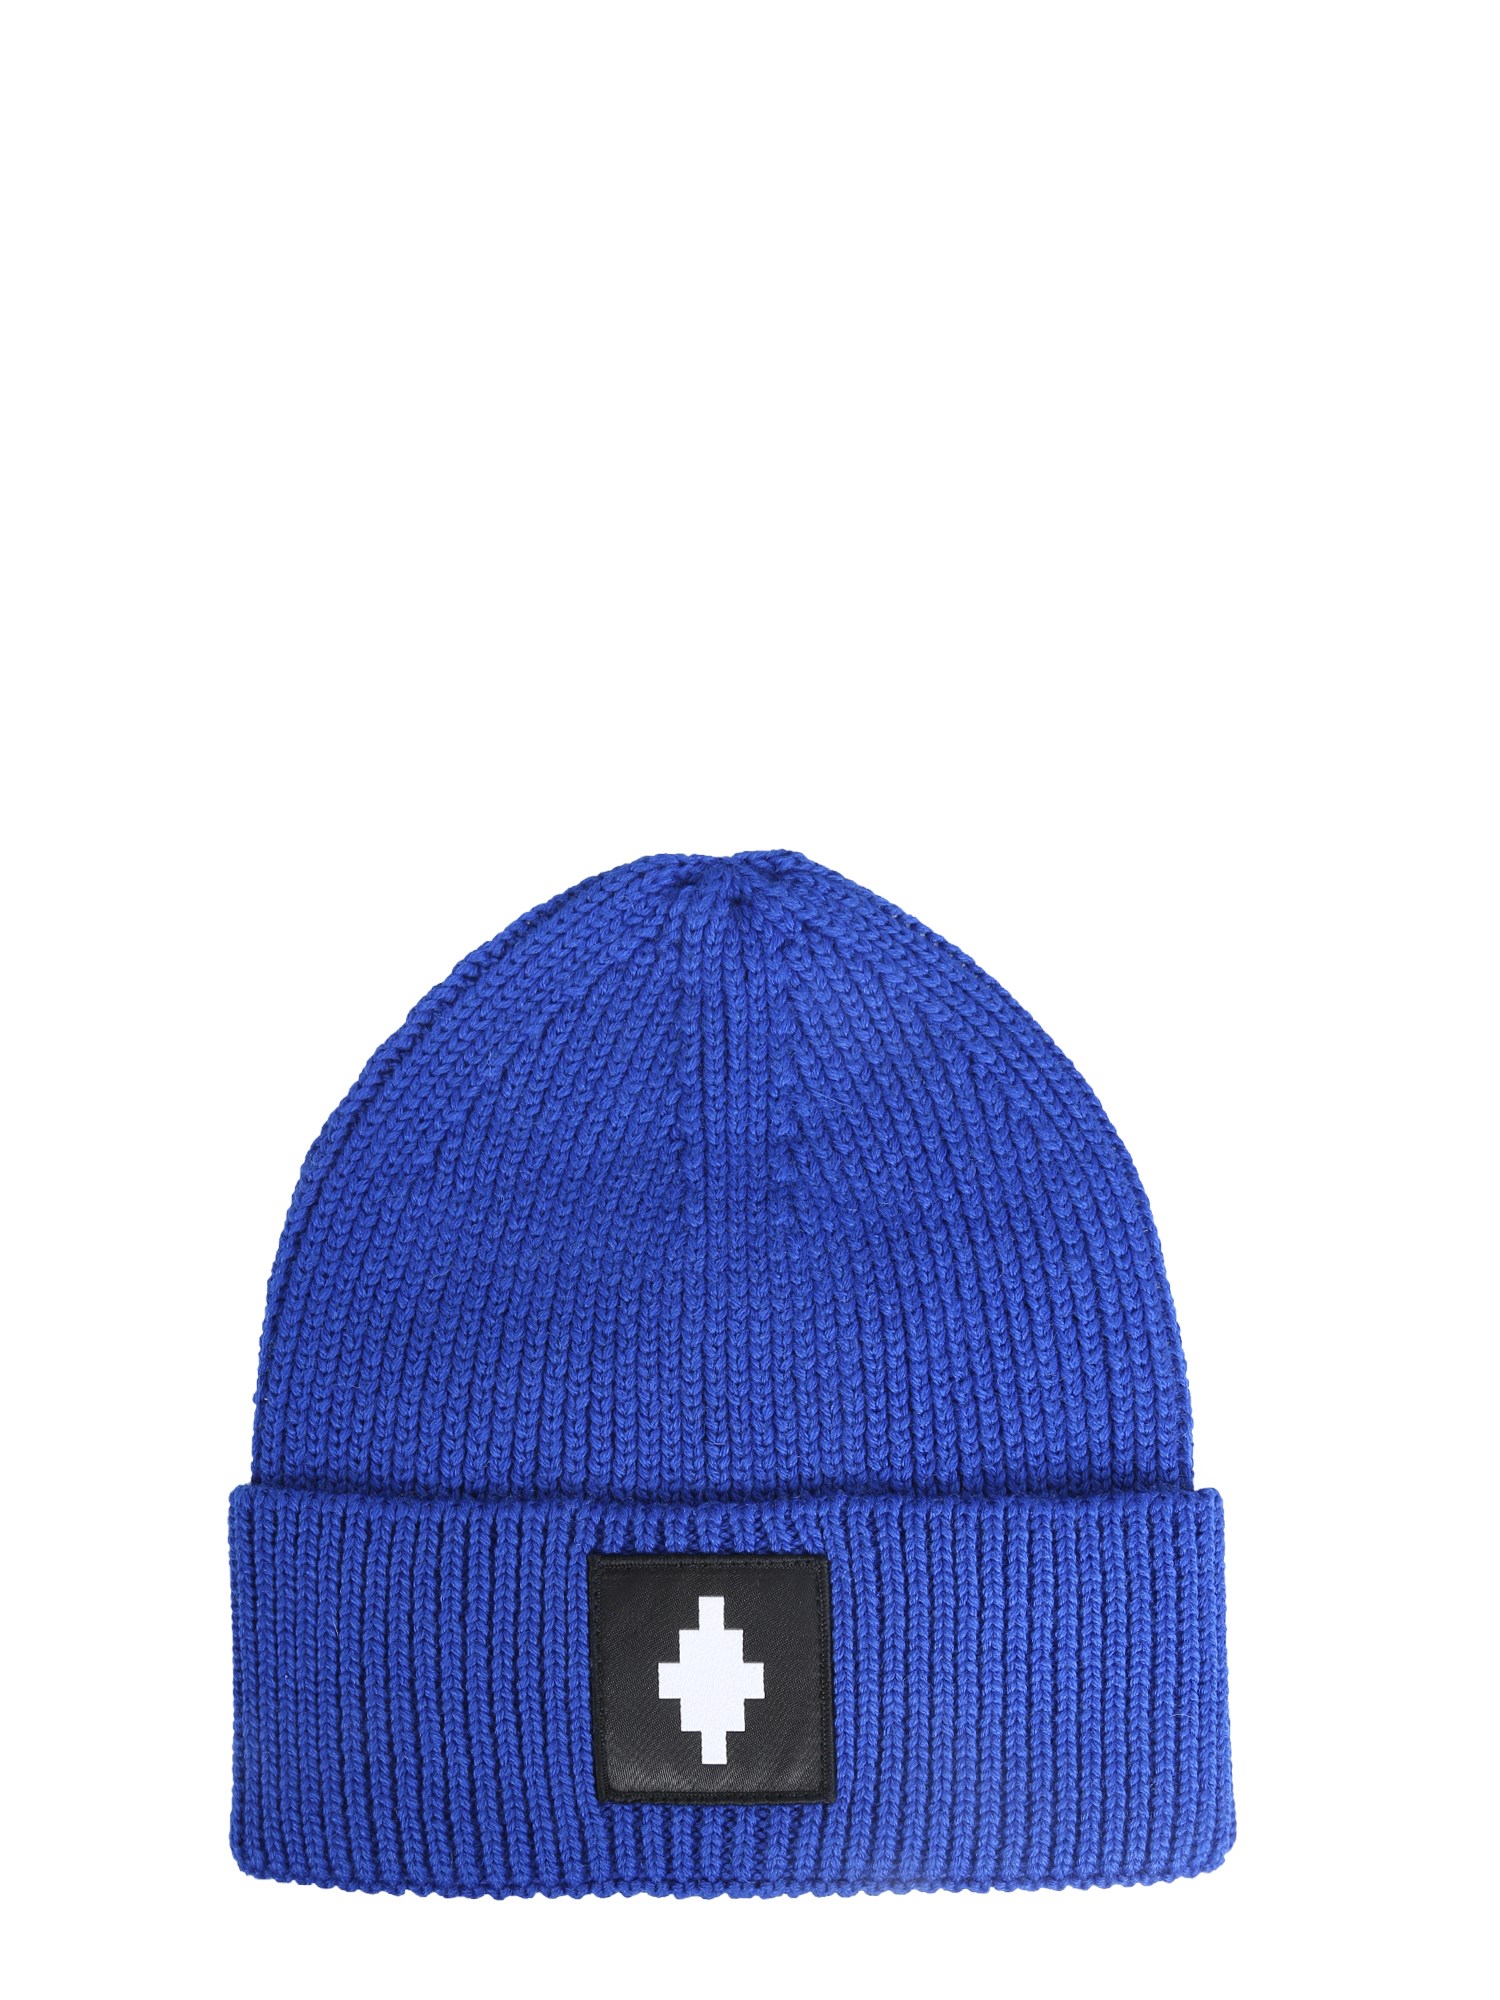 marcelo burlon county of milan knitted hat